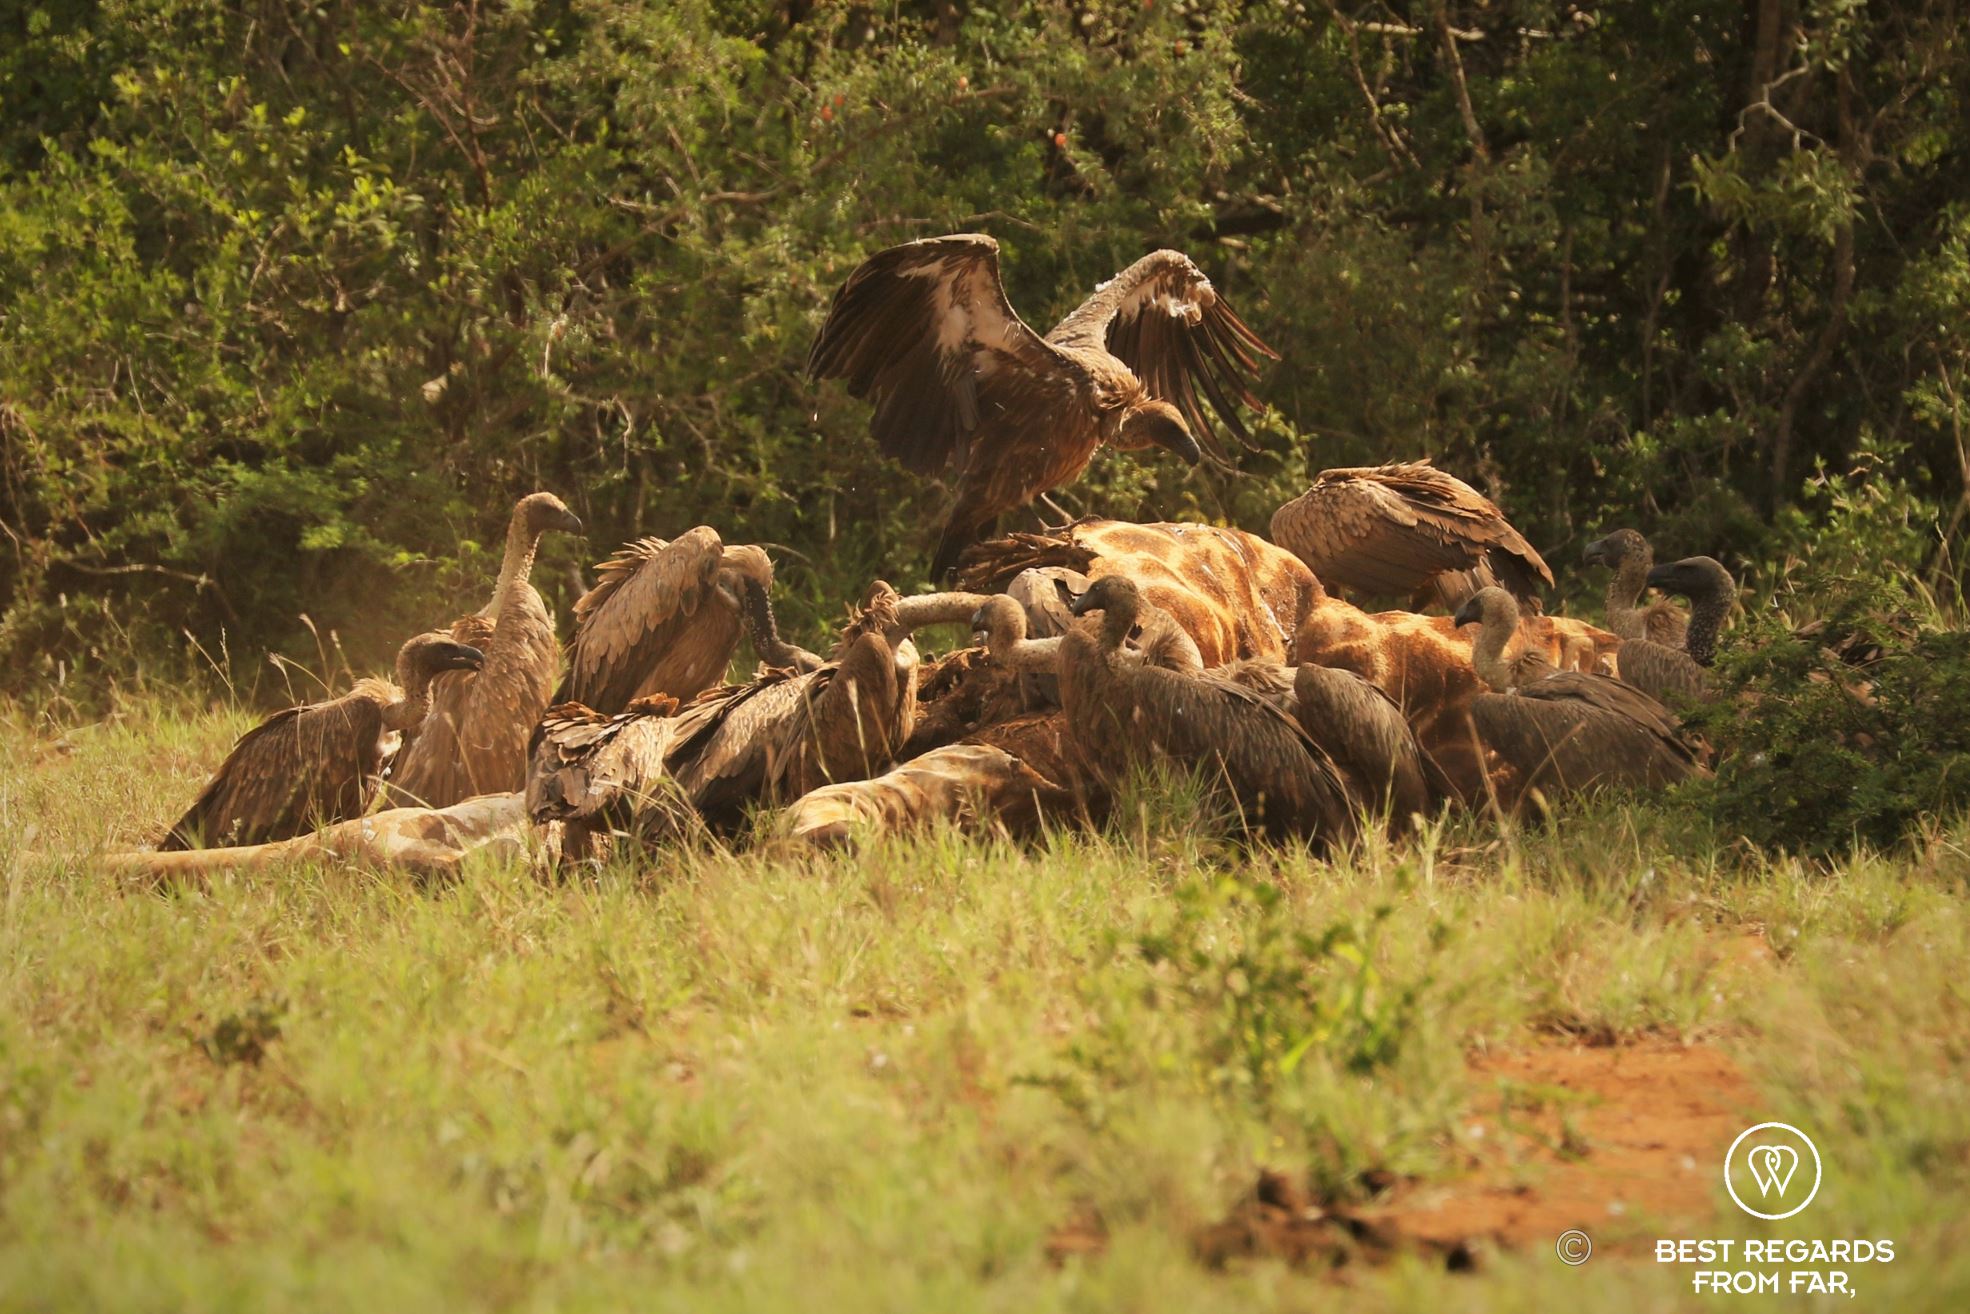 Vultures feasting on a giraffe, Mkhuze Game Reserve, South Africa